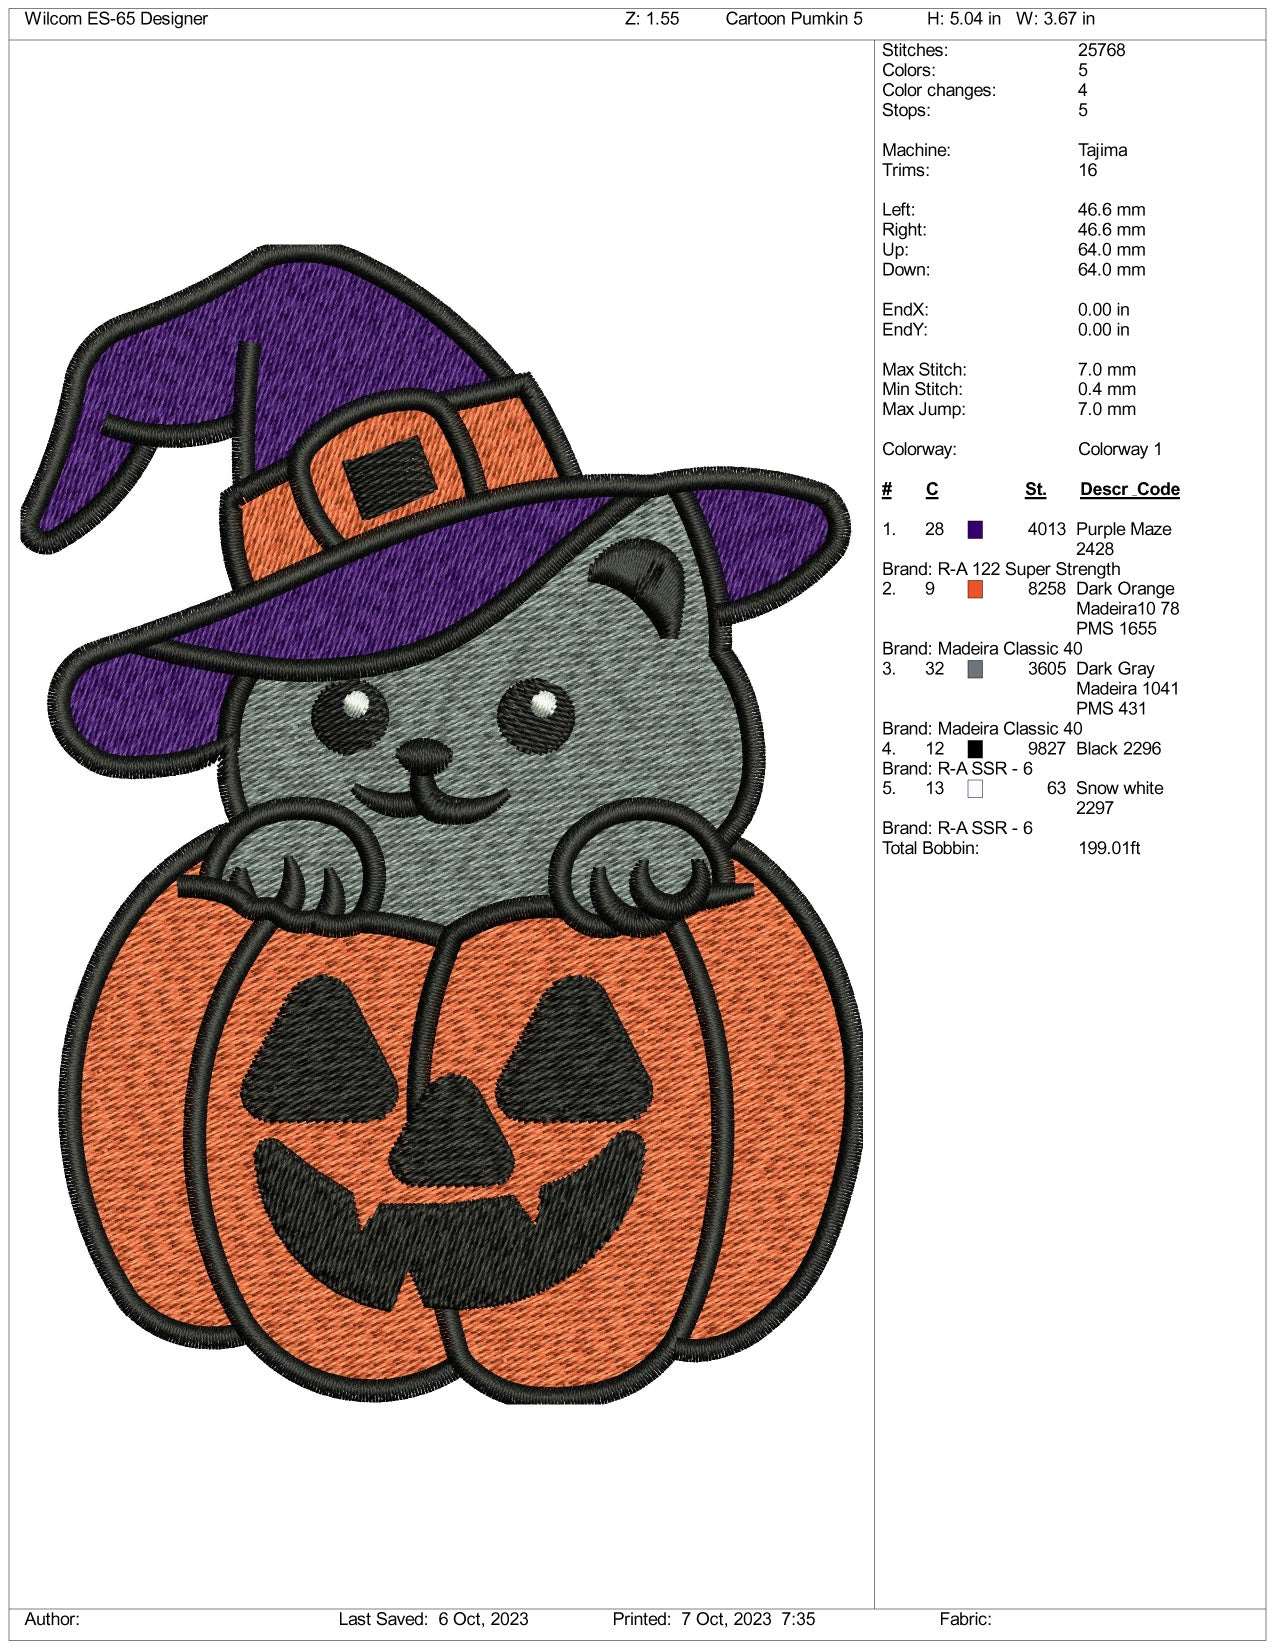 Cat In The Pumkin Embroidery Design Files - 5 Size's